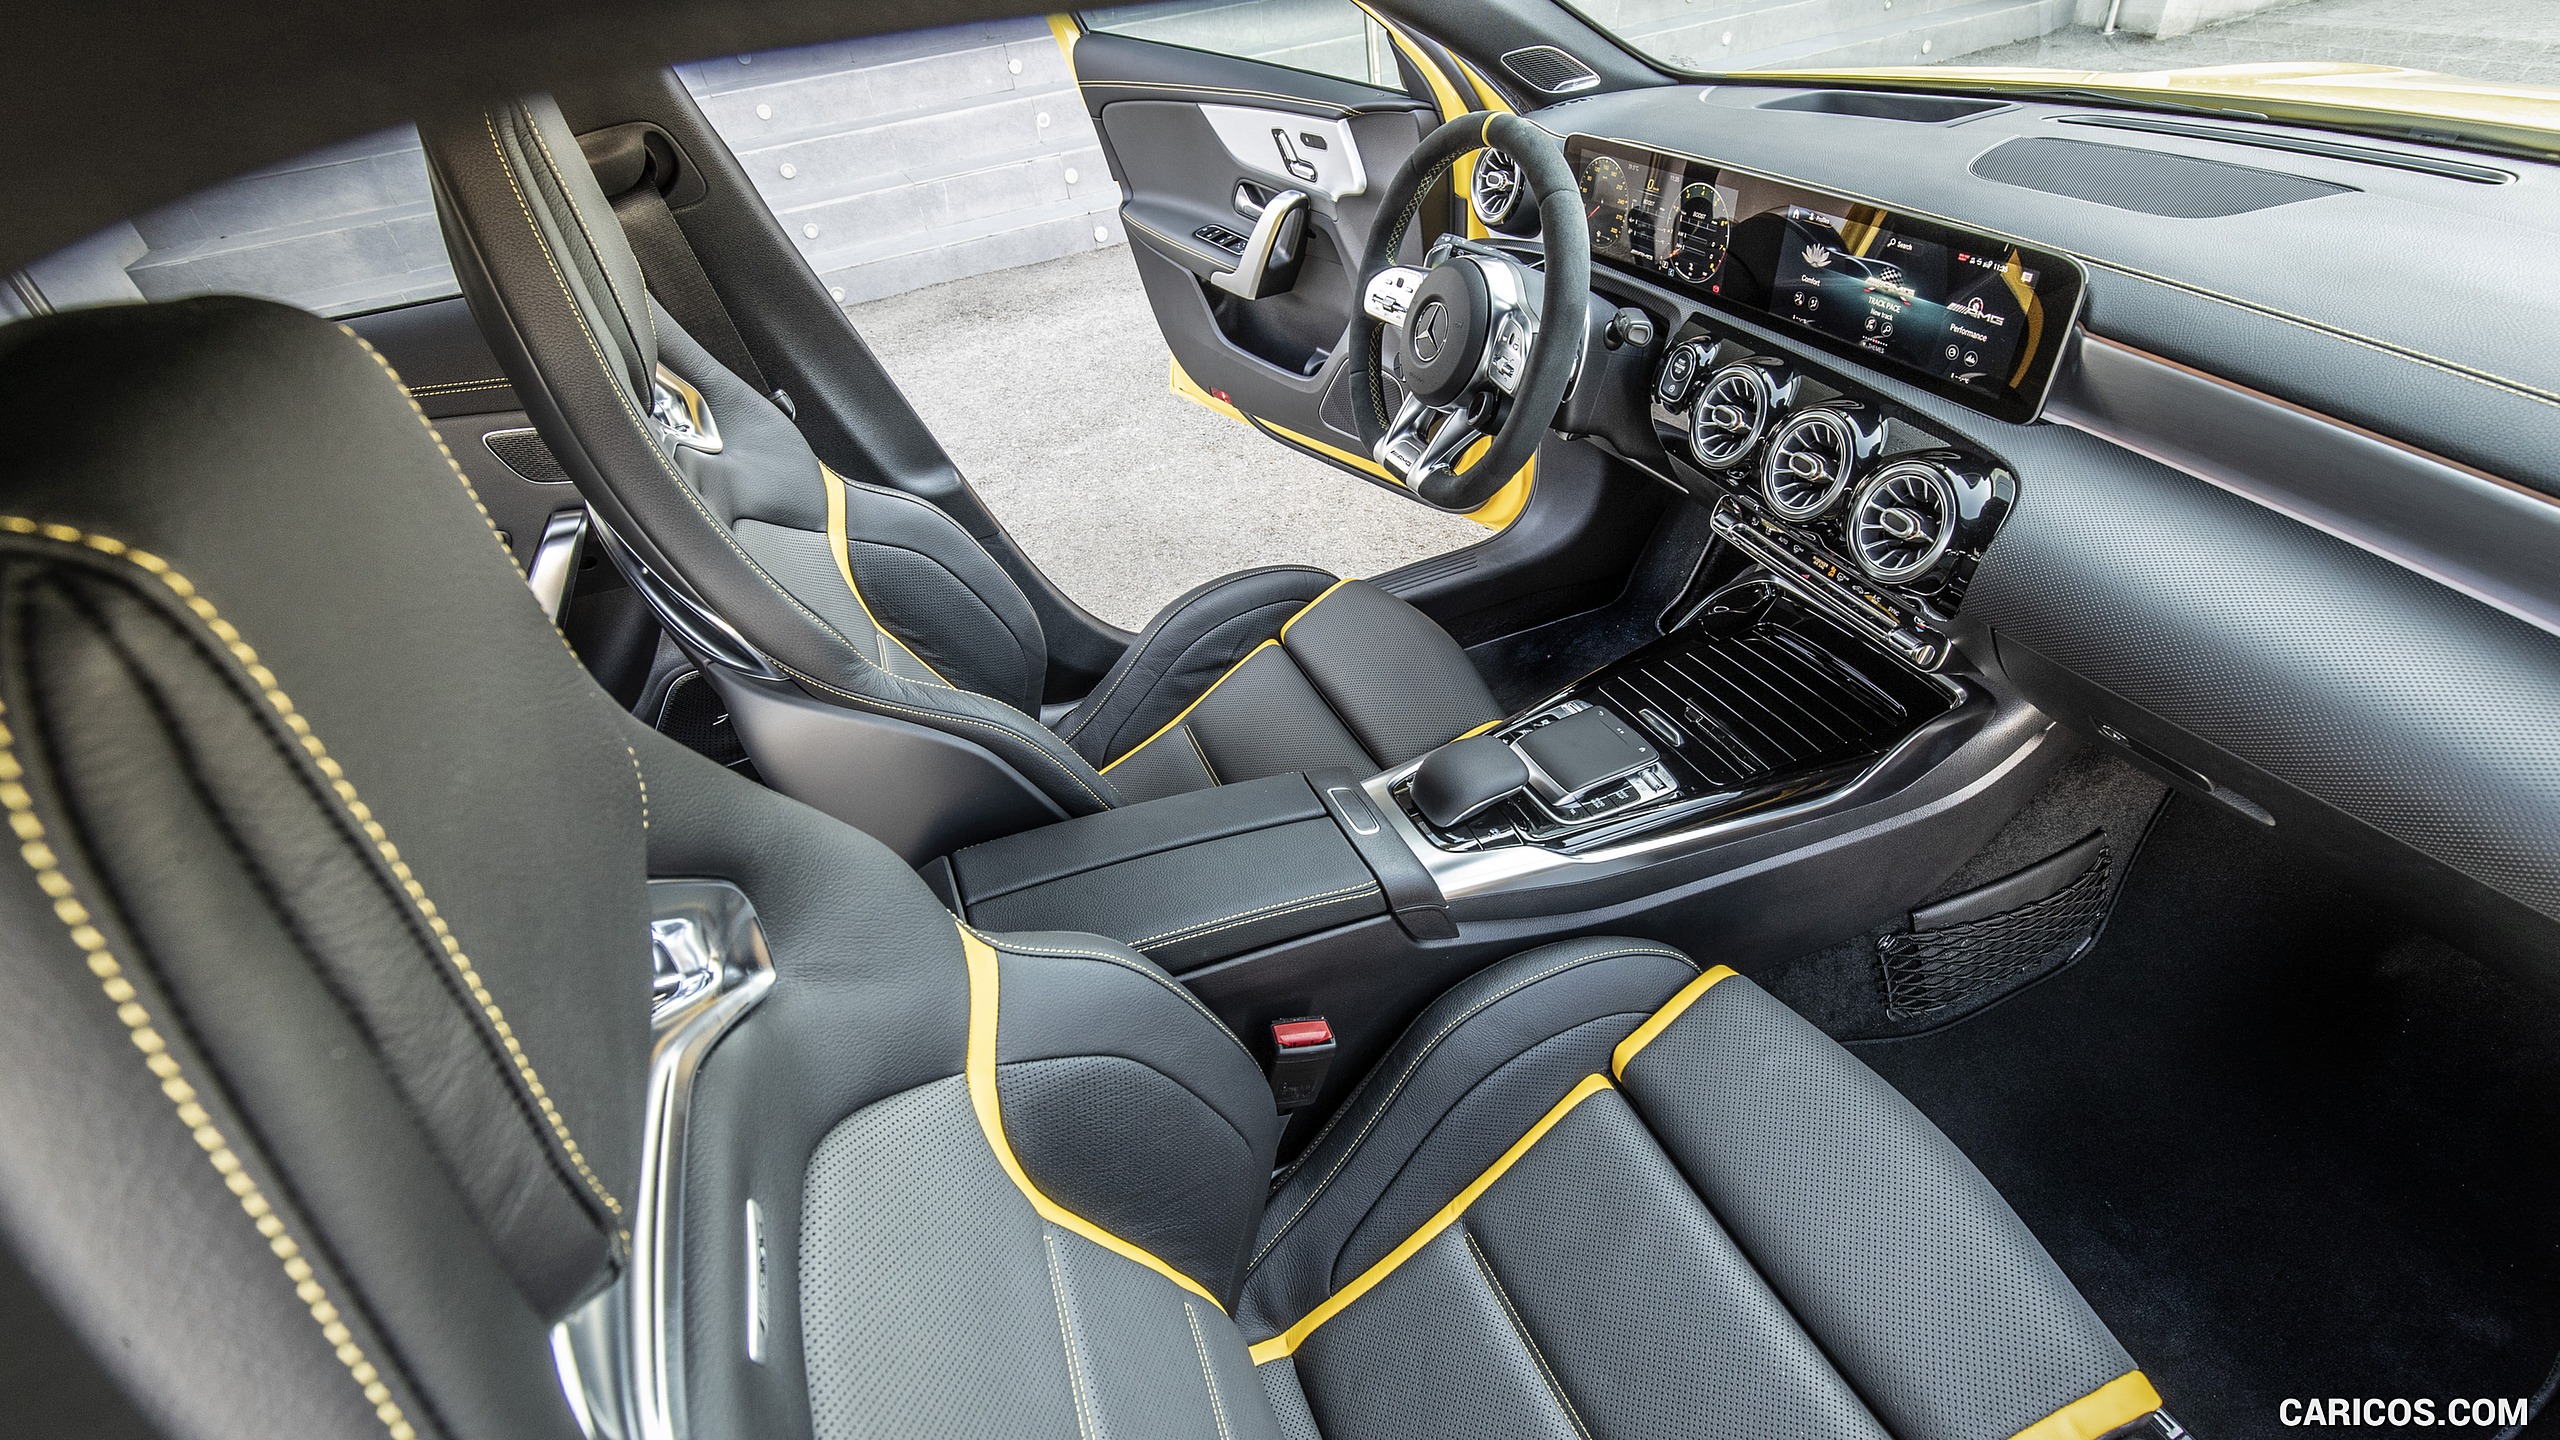 2020 Mercedes-AMG A 45 S 4MATIC+ - Interior, Front Seats, #112 of 188